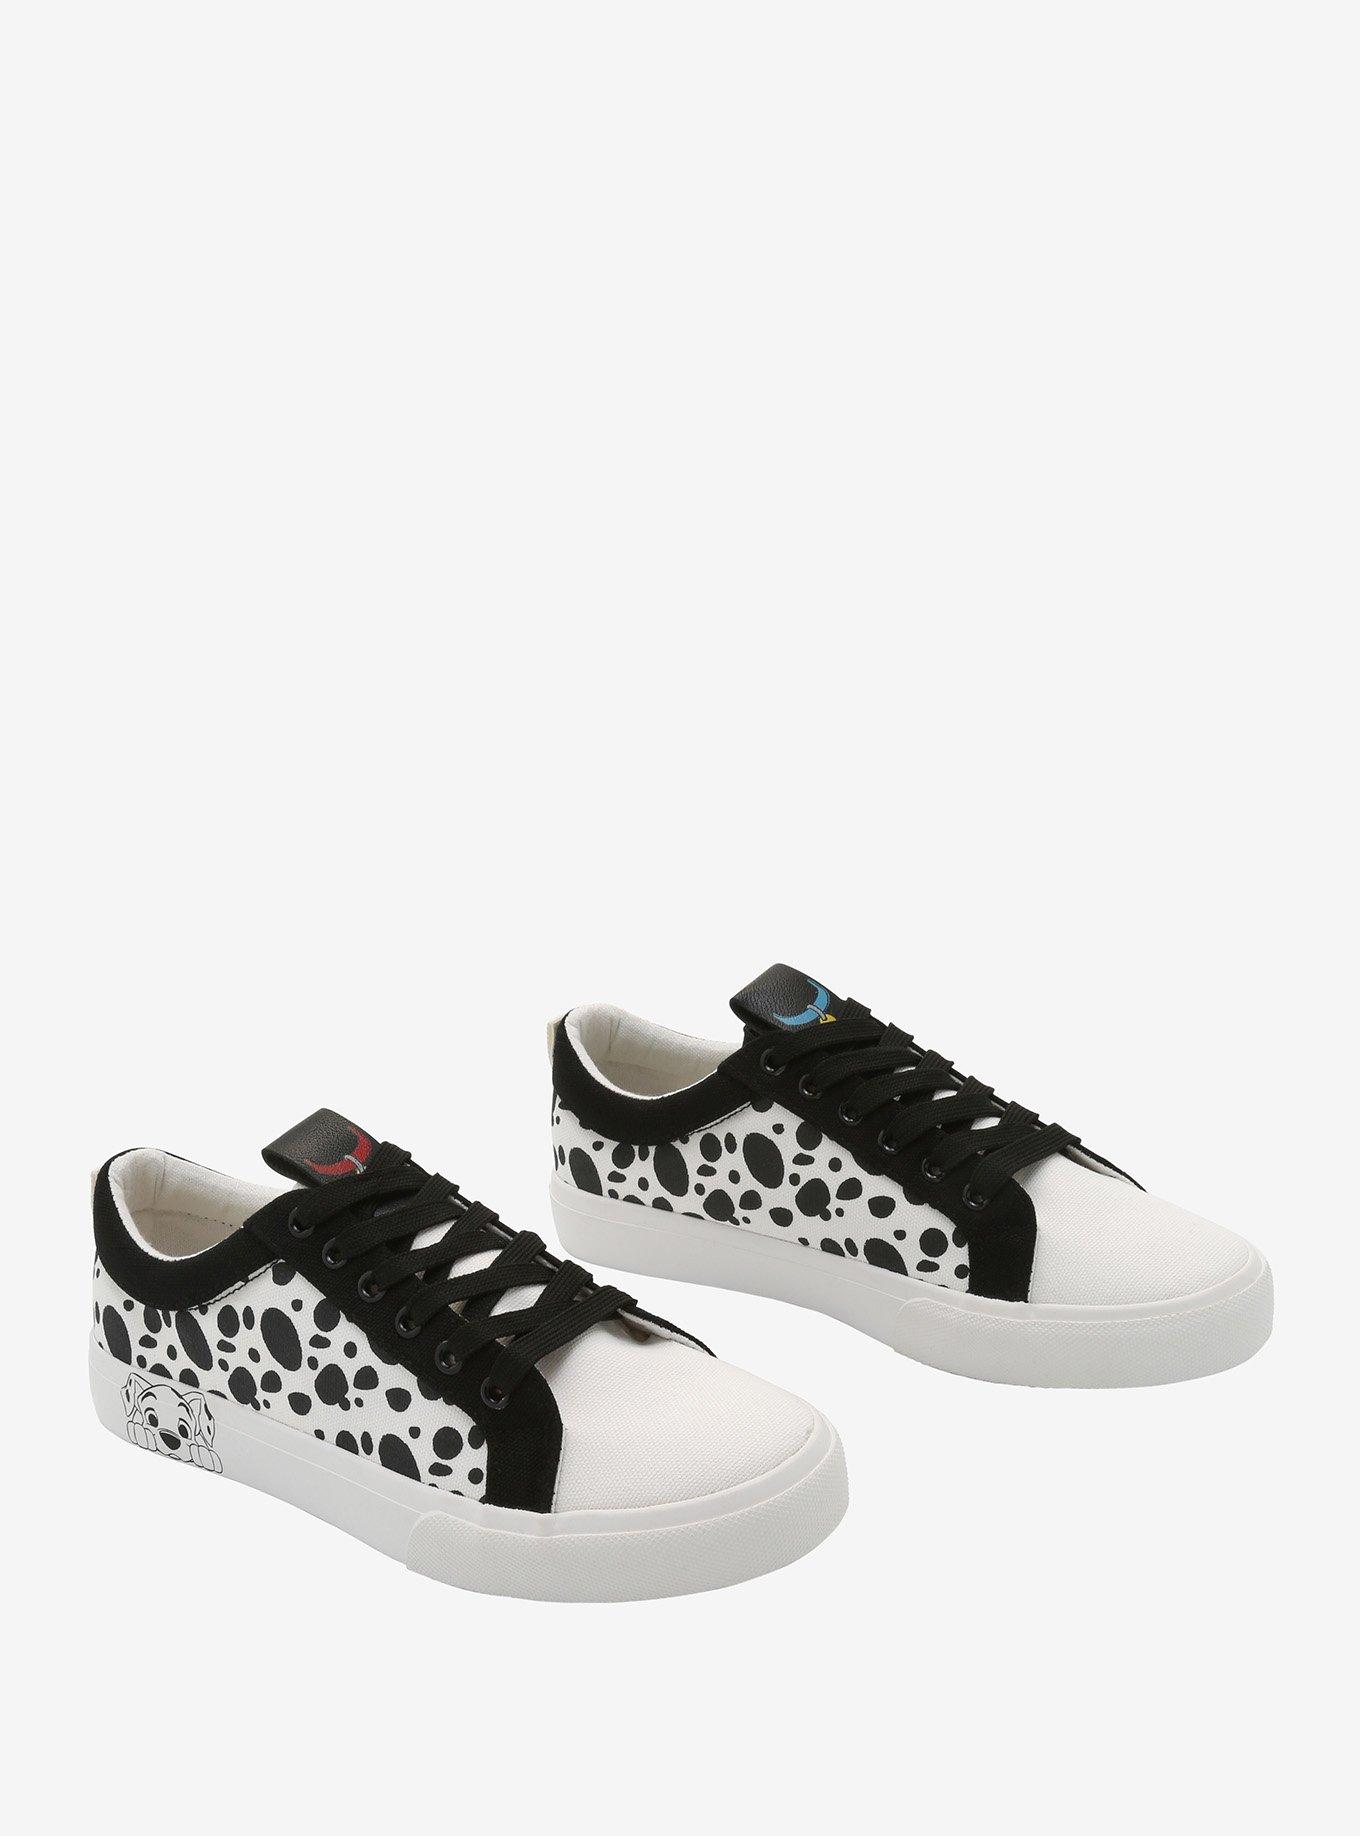 Disney 101 Dalmatians Spotted Lace-Up Sneakers, MULTI, hi-res